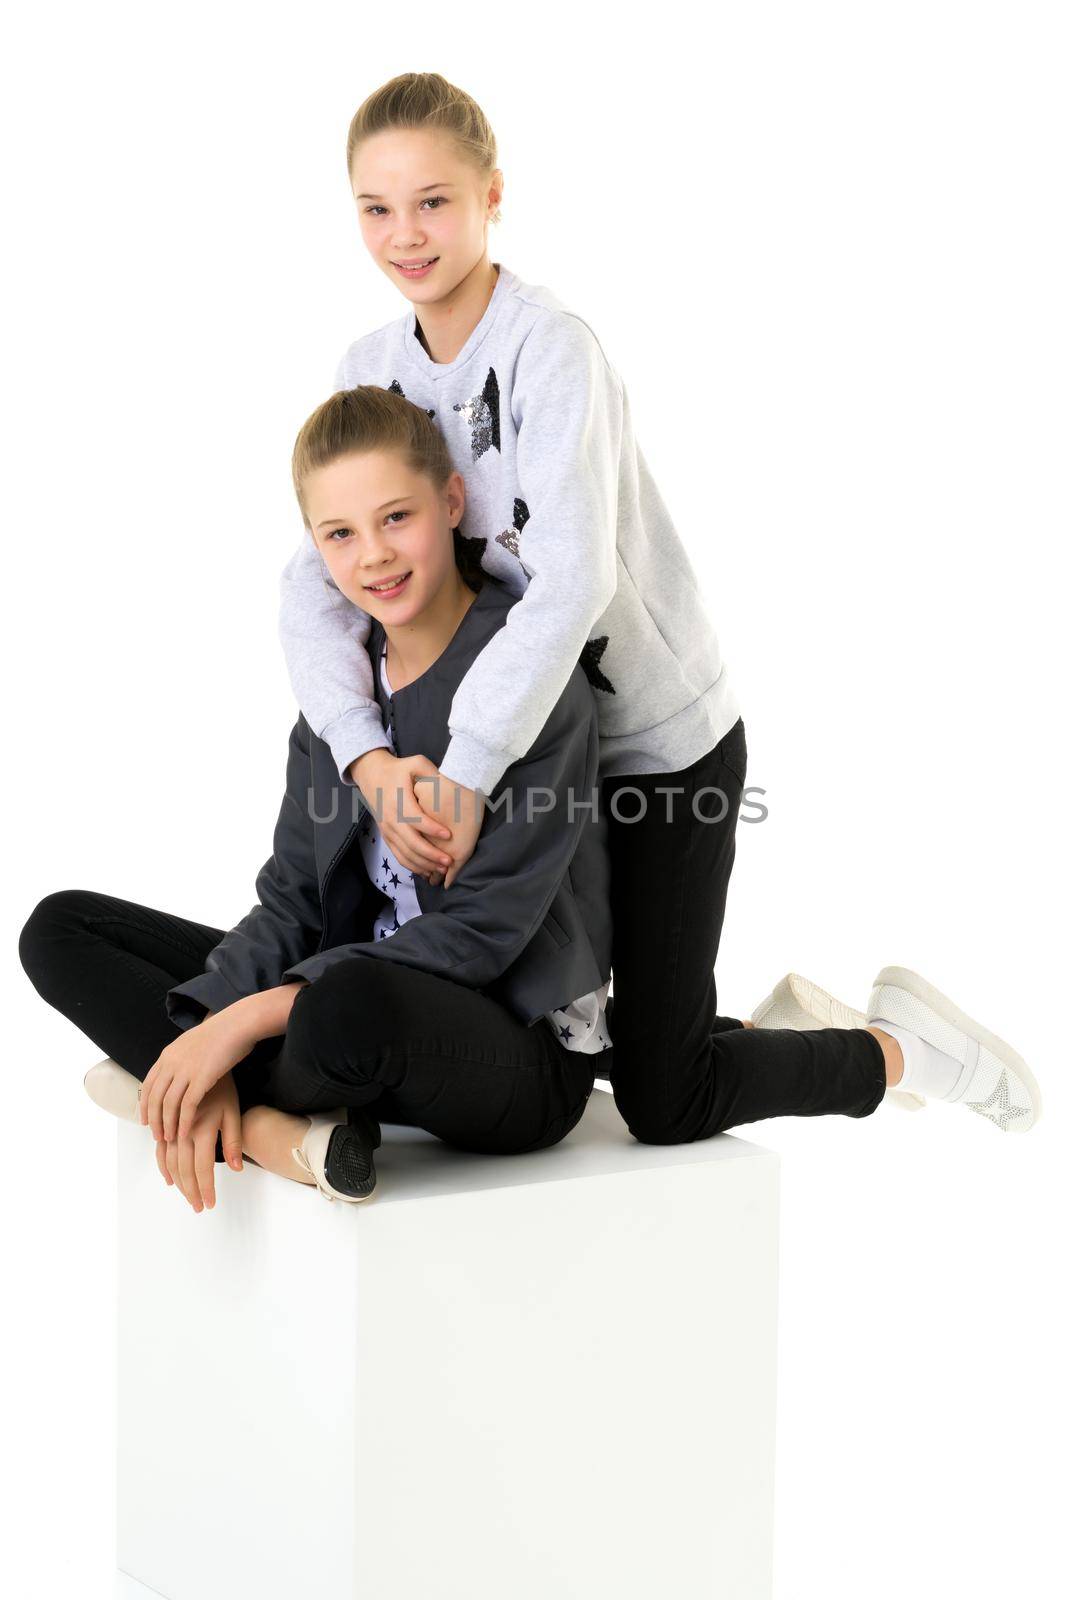 Smiling teenage girls in trendy stylish outfit posing together on a white background in the studio, portrait of cute twin sisters.